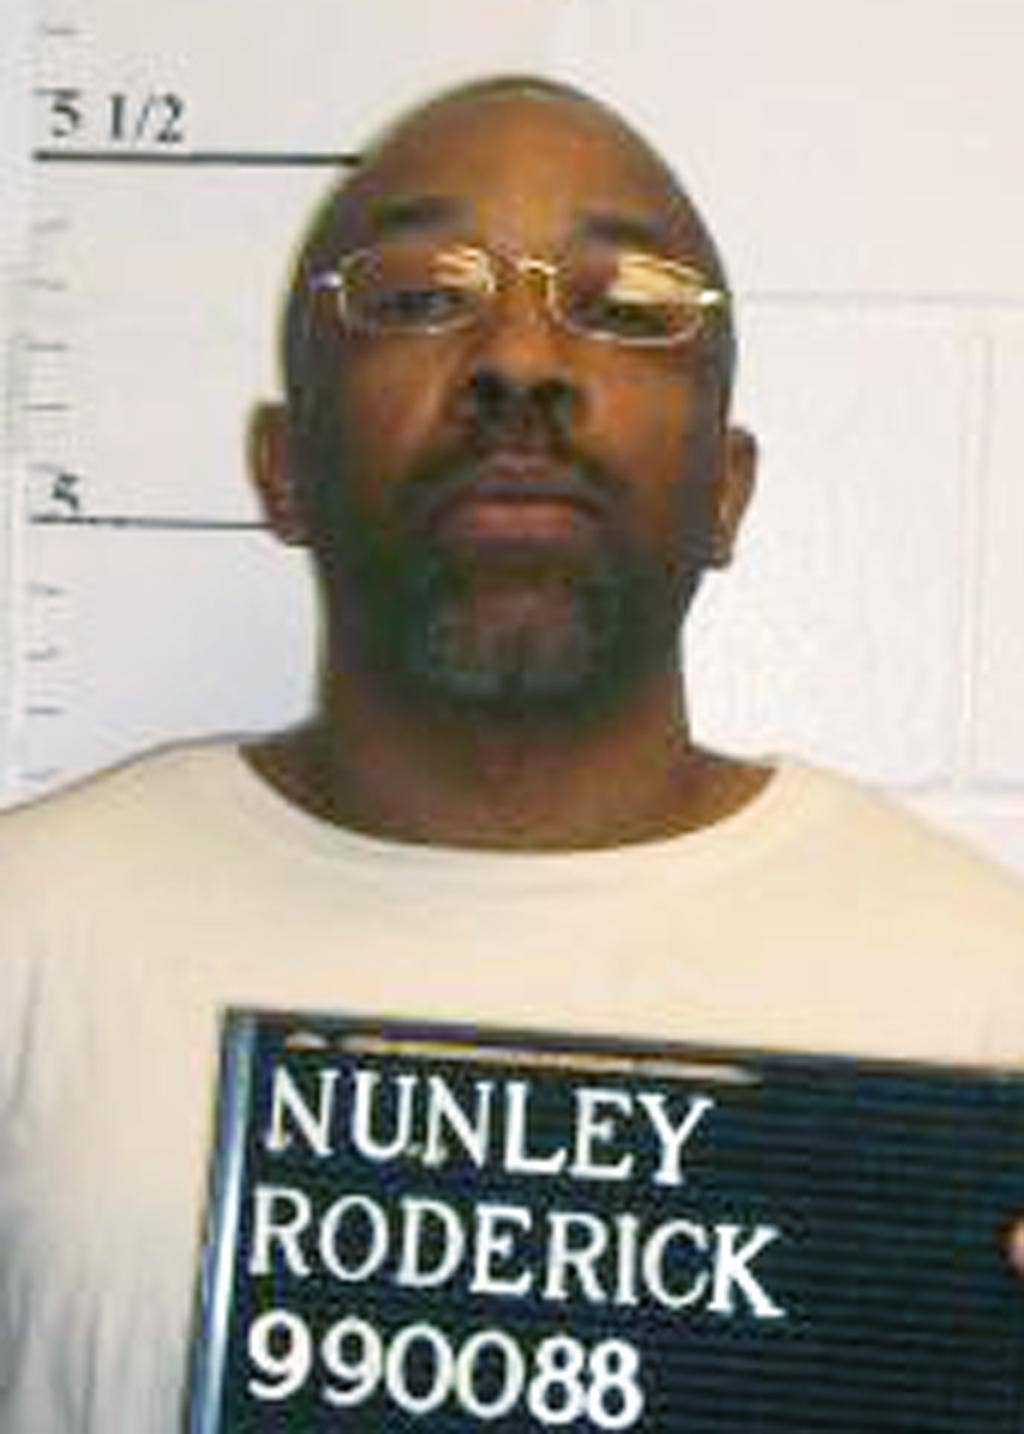 Missouri man faces execution for raping, killing 15yearold girl in